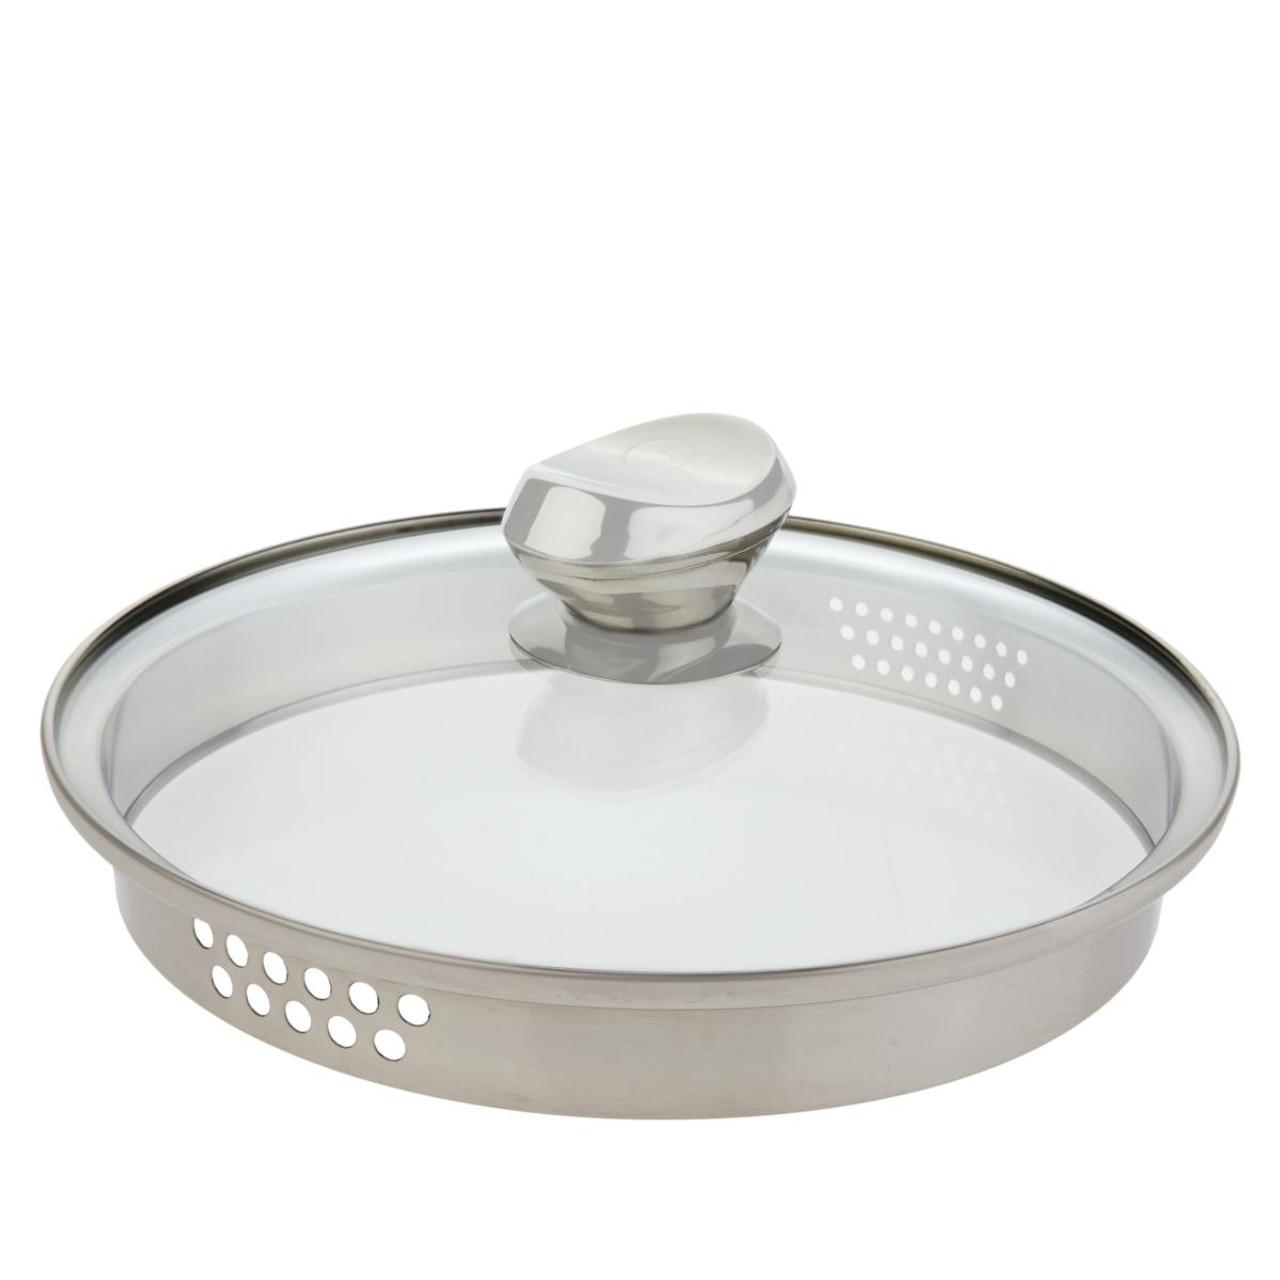 Wolfgang Puck 12-Cup Stainless Steel Pot with Colander Lid Model